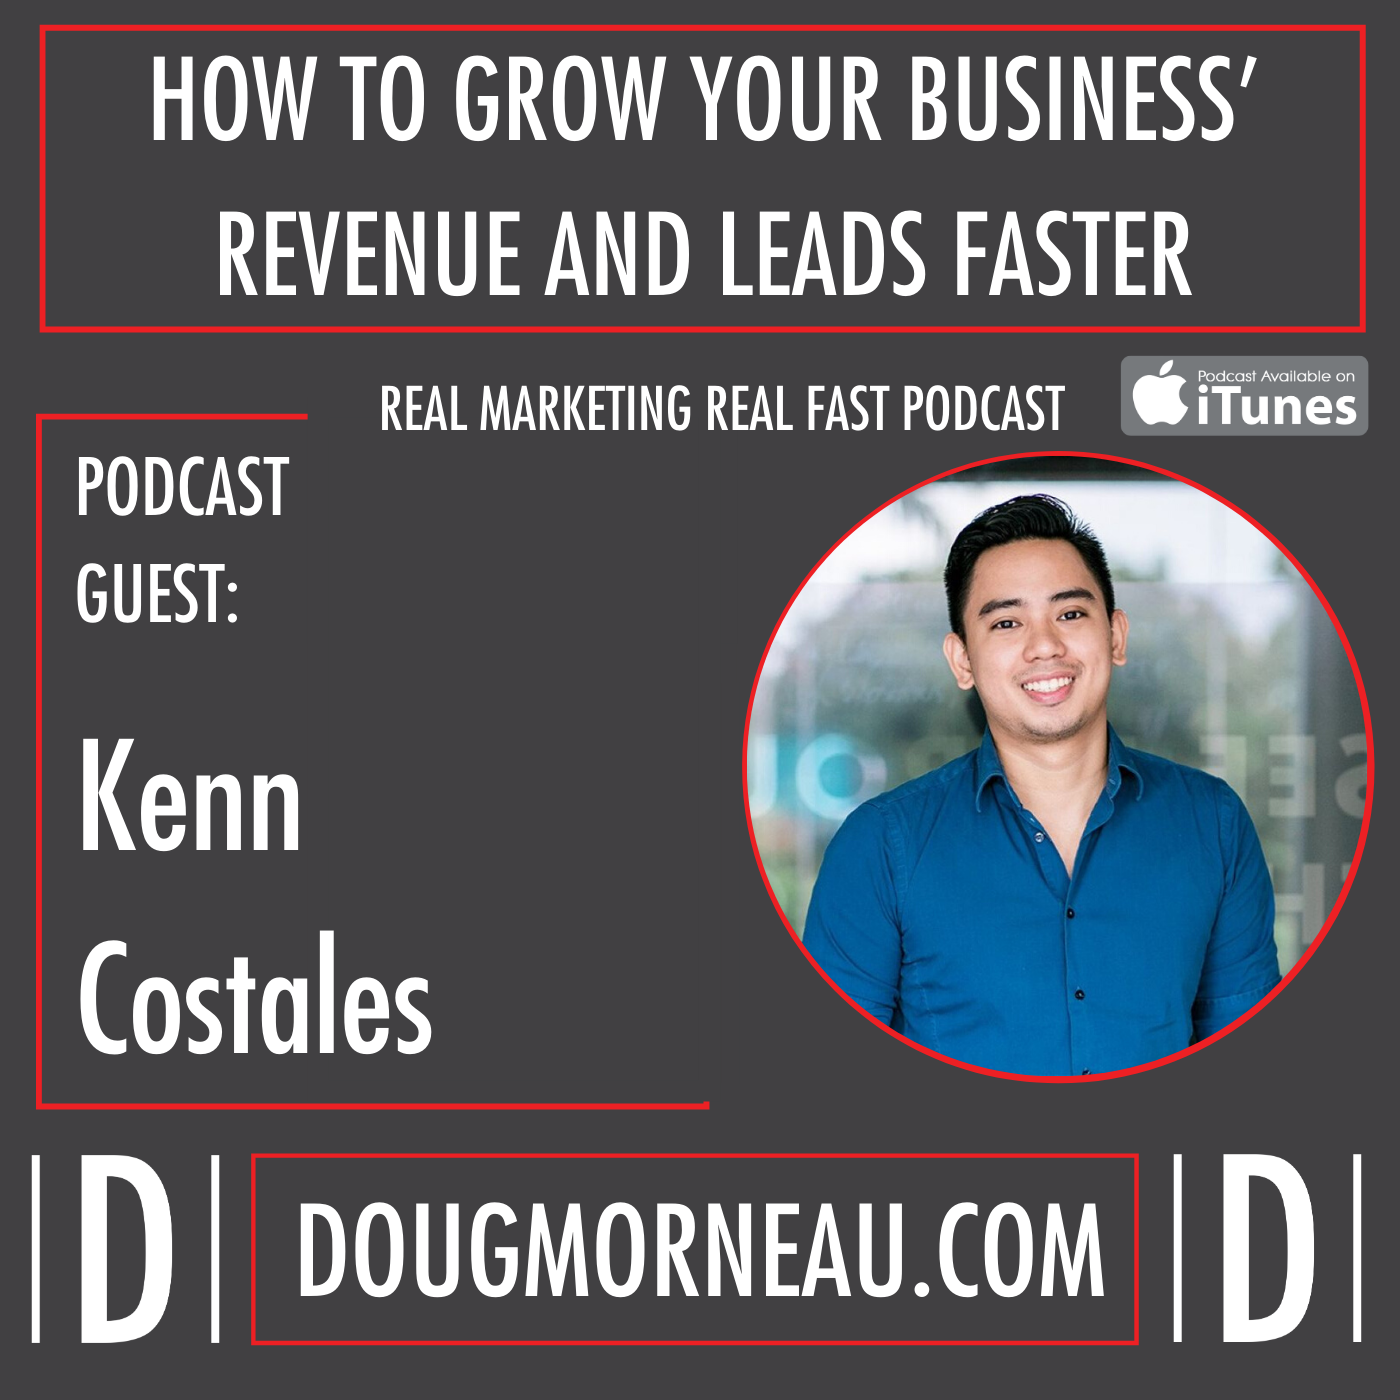 KEN COSTALES - HOW TO GROW YOUR BUSINESS’ REVENUE AND LEADS FASTER - DOUG MORNEAU - REAL MARKETING REAL FAST PODCAST